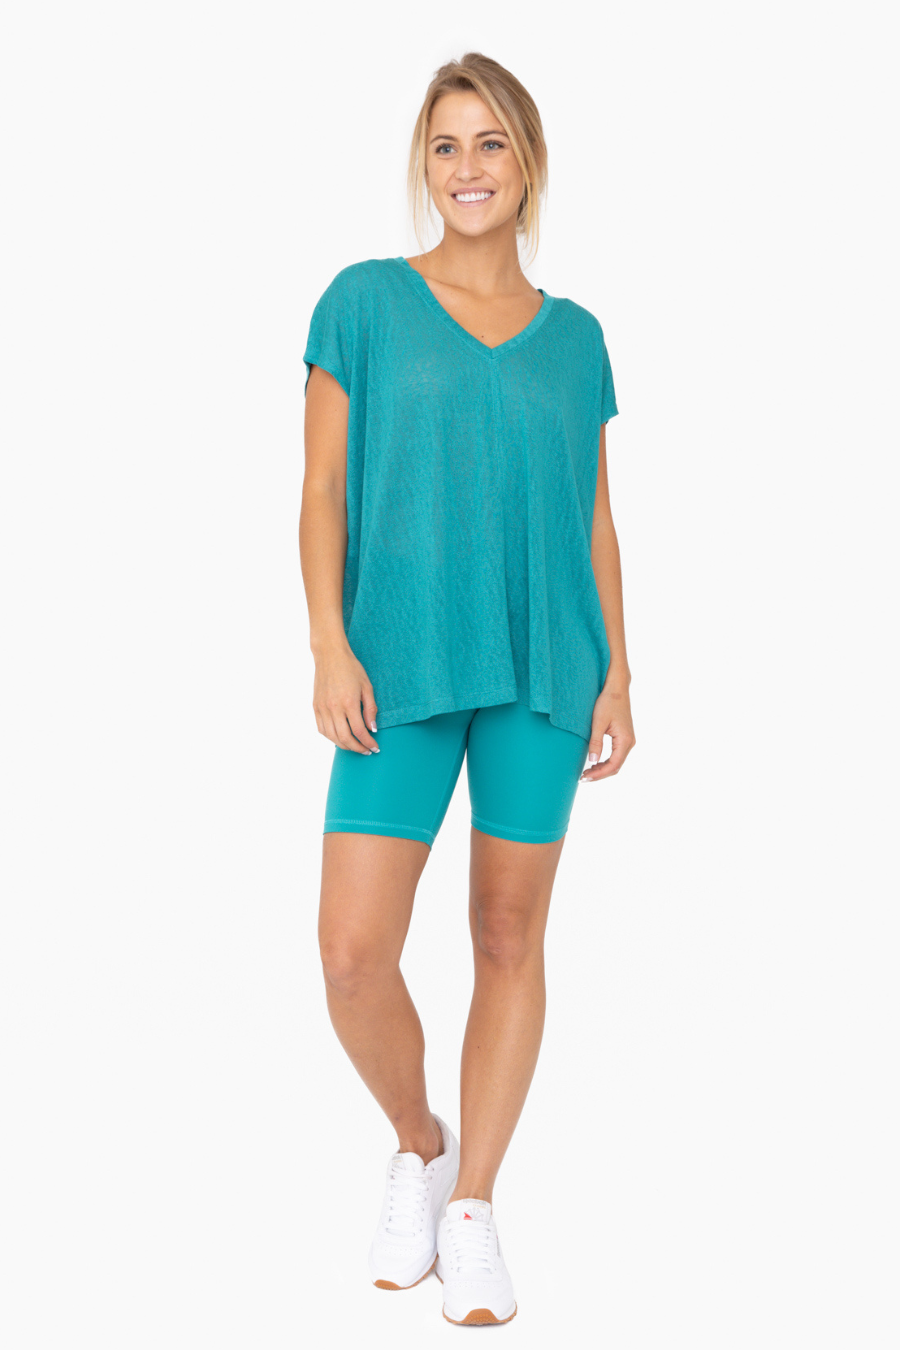 full length view of the mina top in the color teal, paired with matching shorts